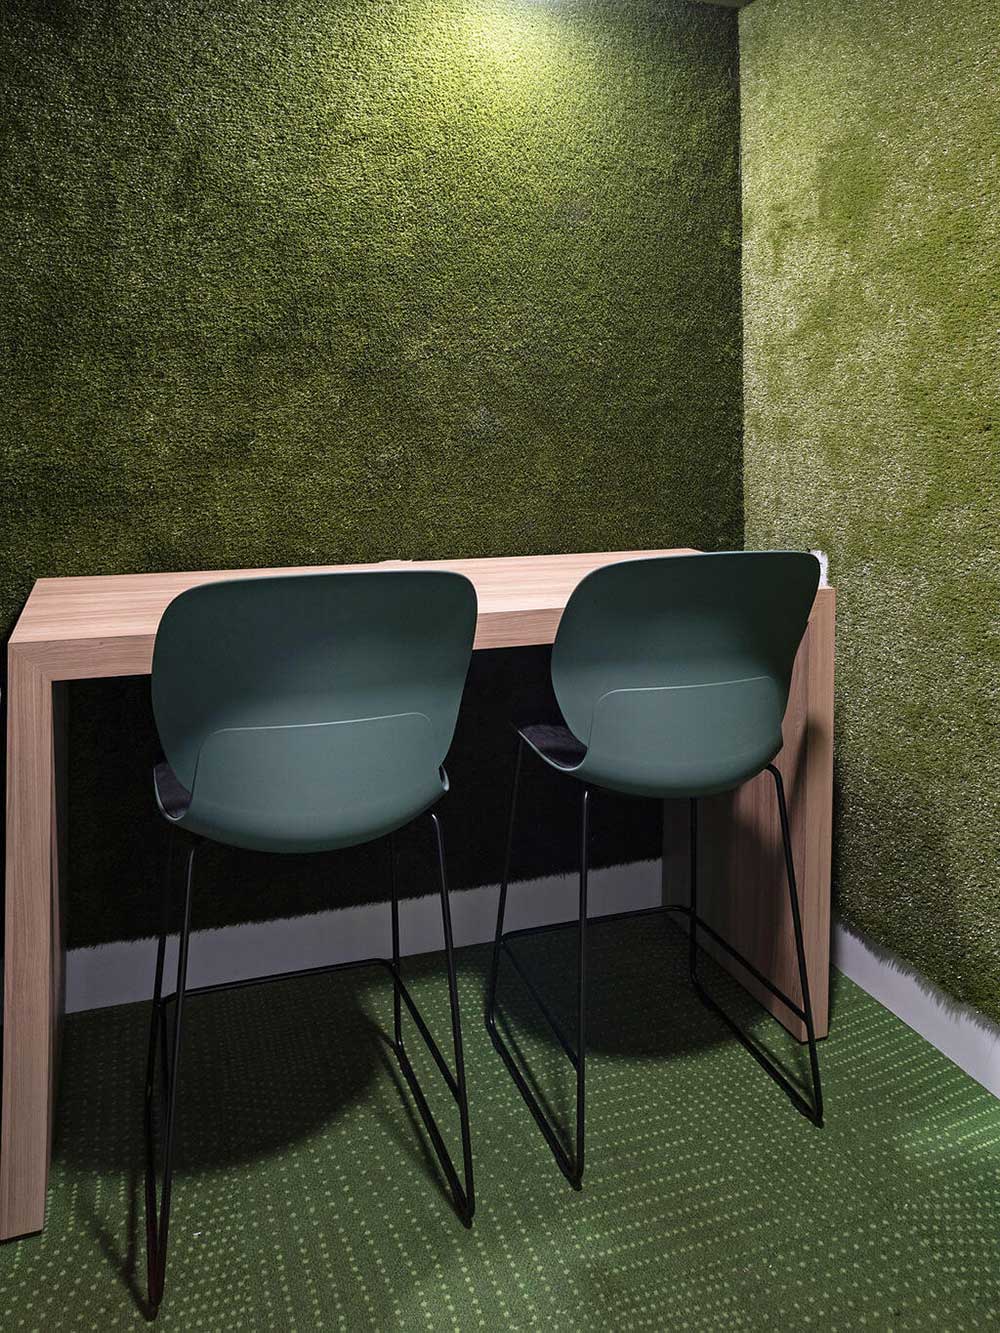 Private student study space design with green chairs and laptop stand